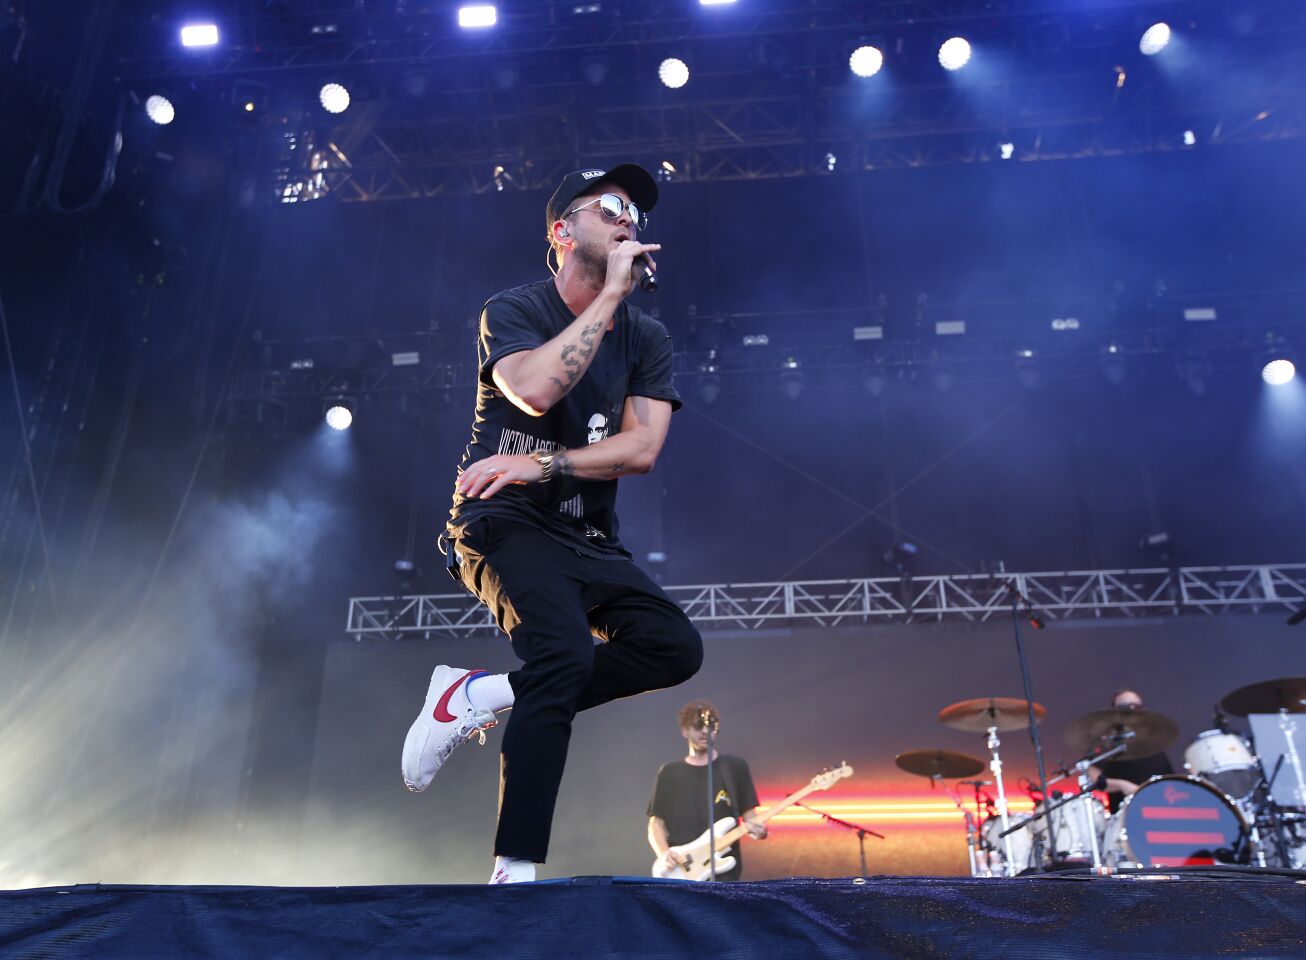 Ryan Tedder of the band OneRepublic performs at the Sunset Cliffs stage at KAABOO Del Mar on Sept. 14, 2019.